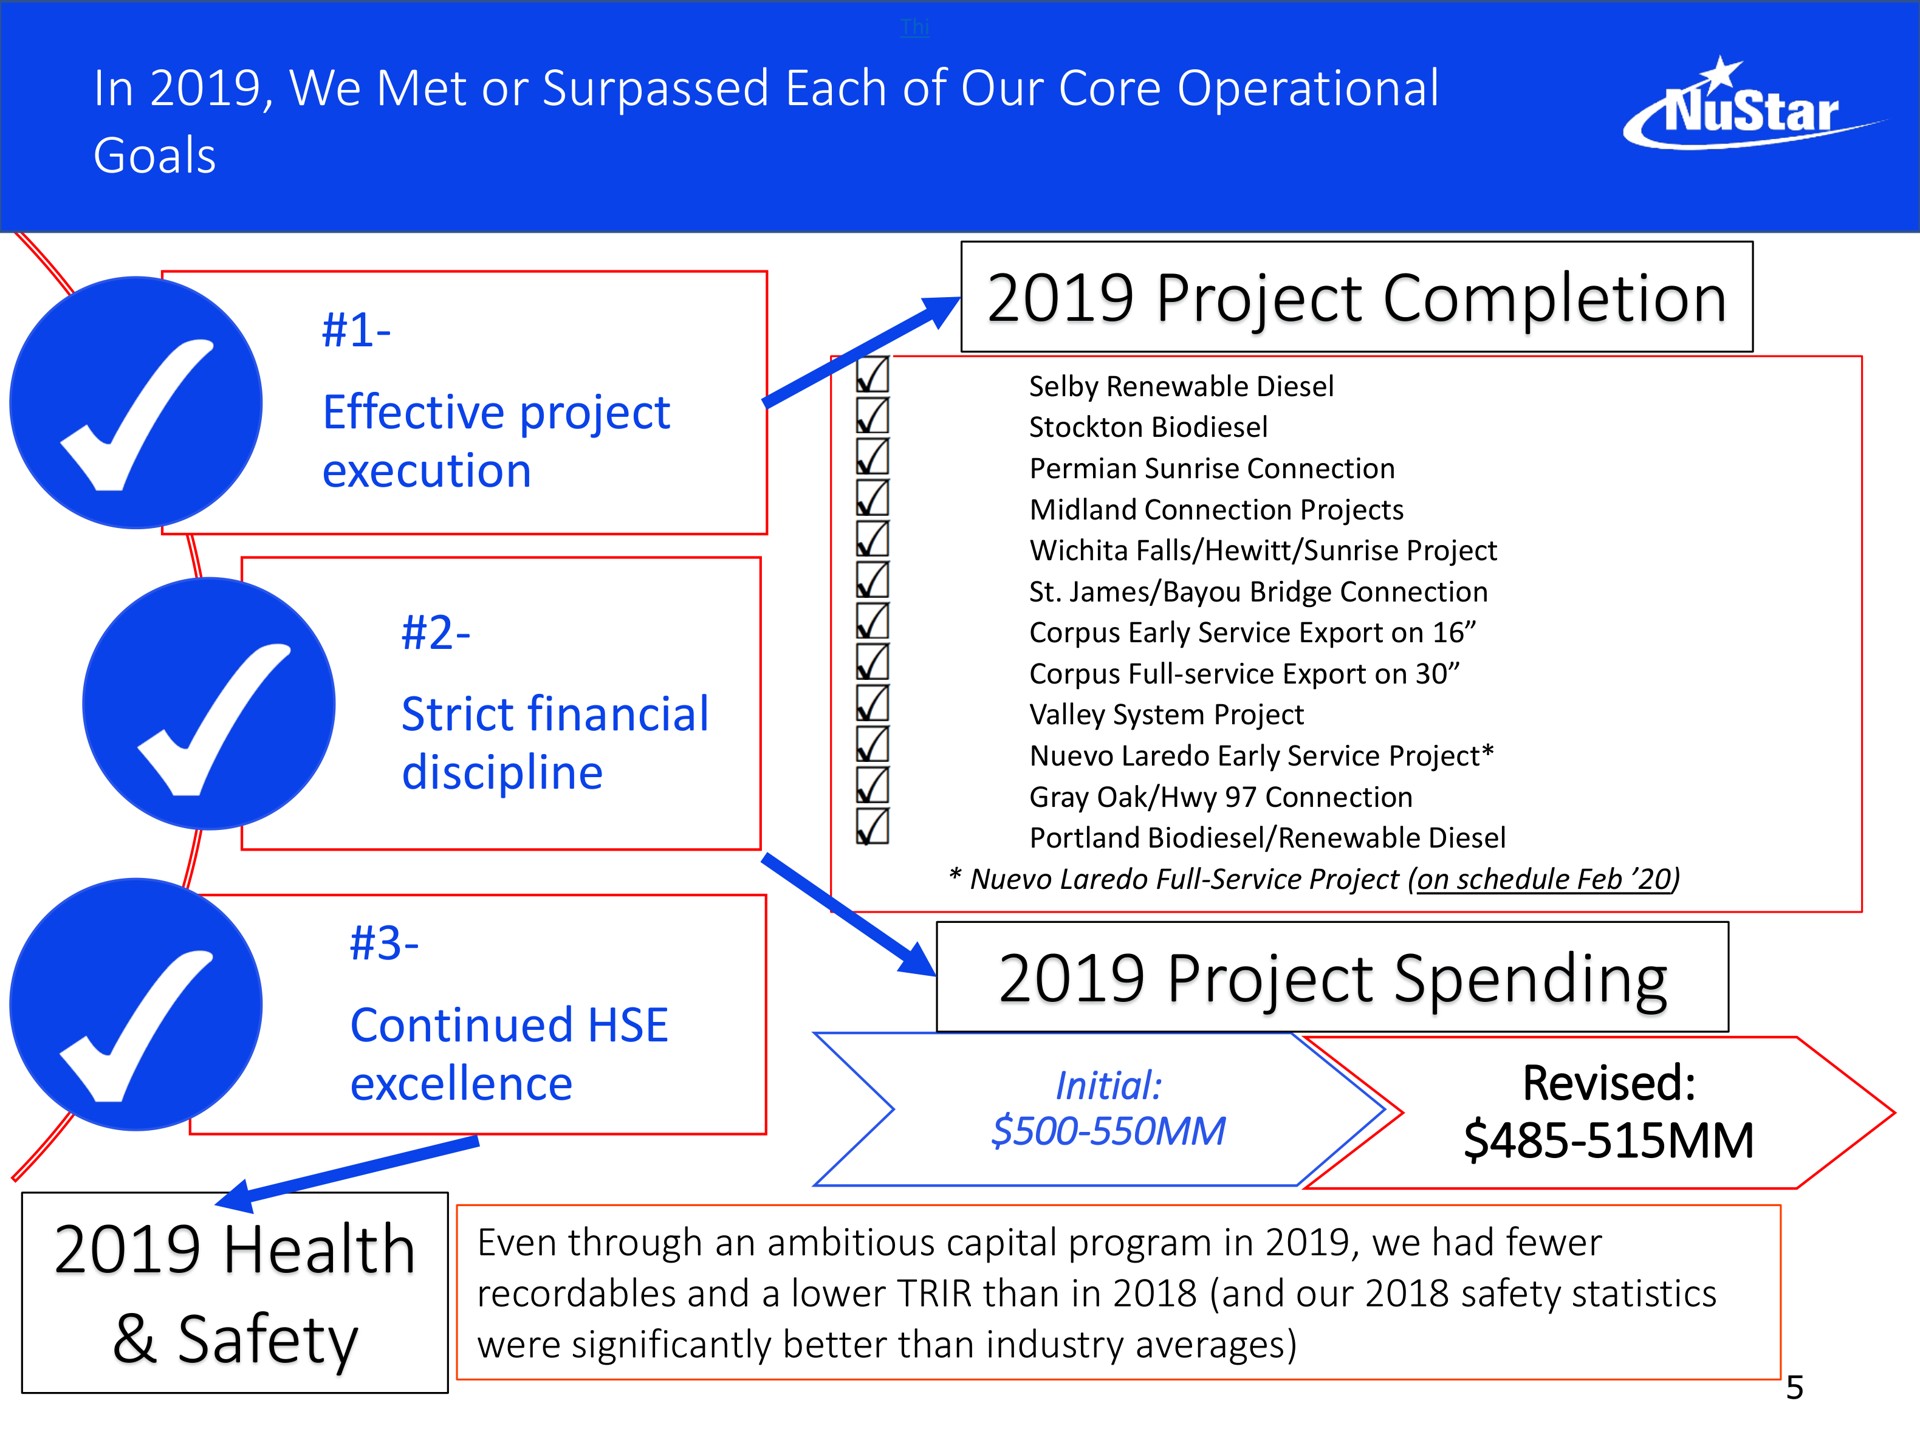 in we met or surpassed each of our core operational goals effective project execution strict financial discipline continued excellence project completion project spending revised health safety ire | NuStar Energy